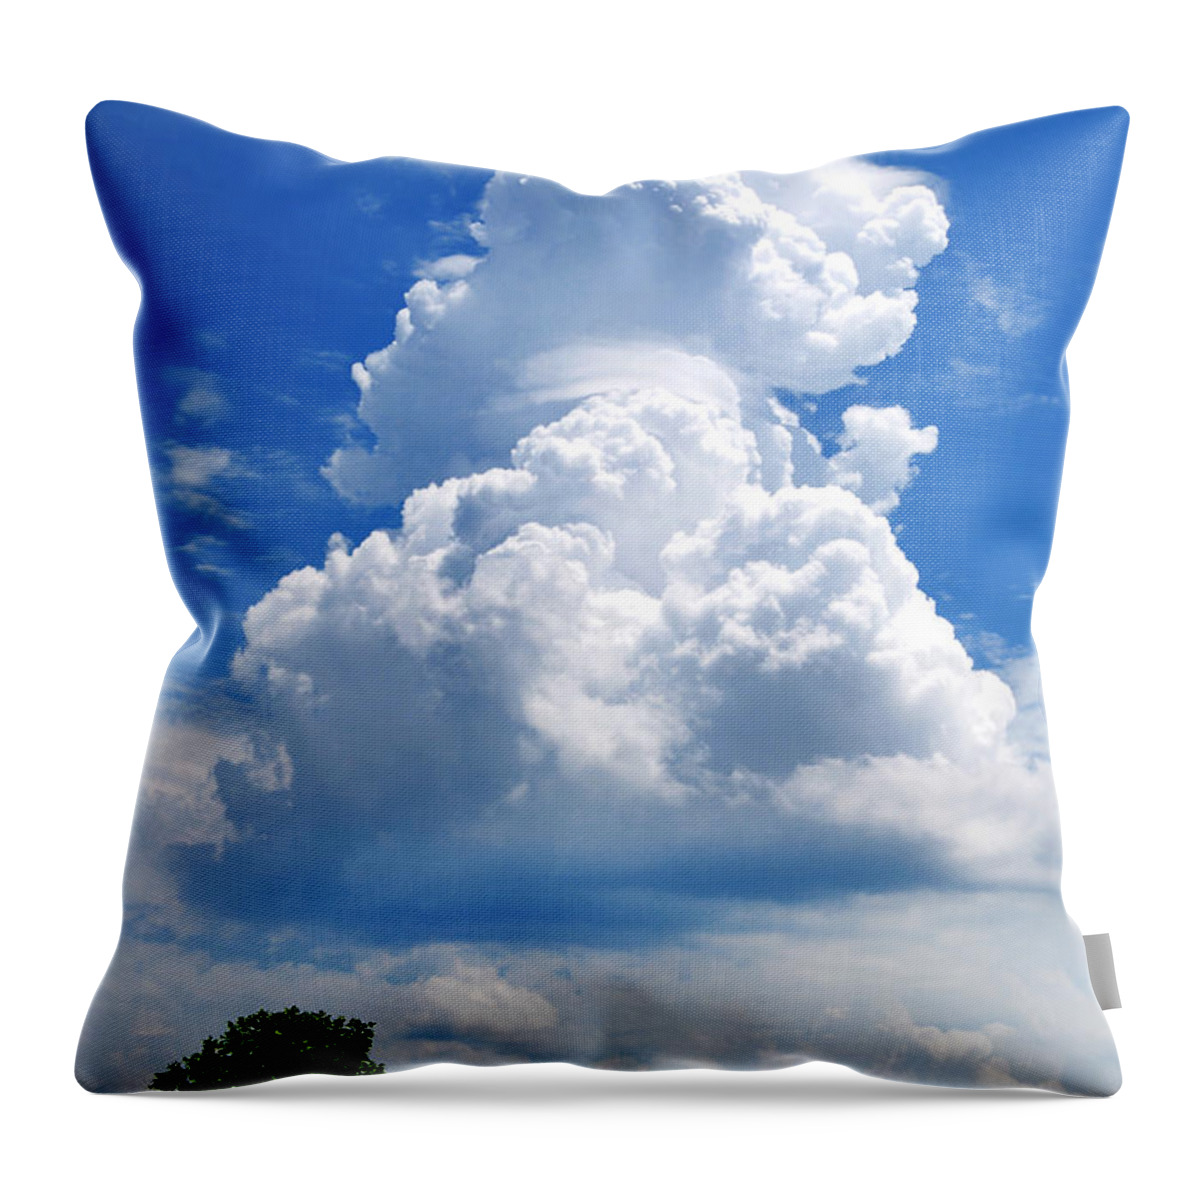  Throw Pillow featuring the photograph Lwv40017 by Lee Winter